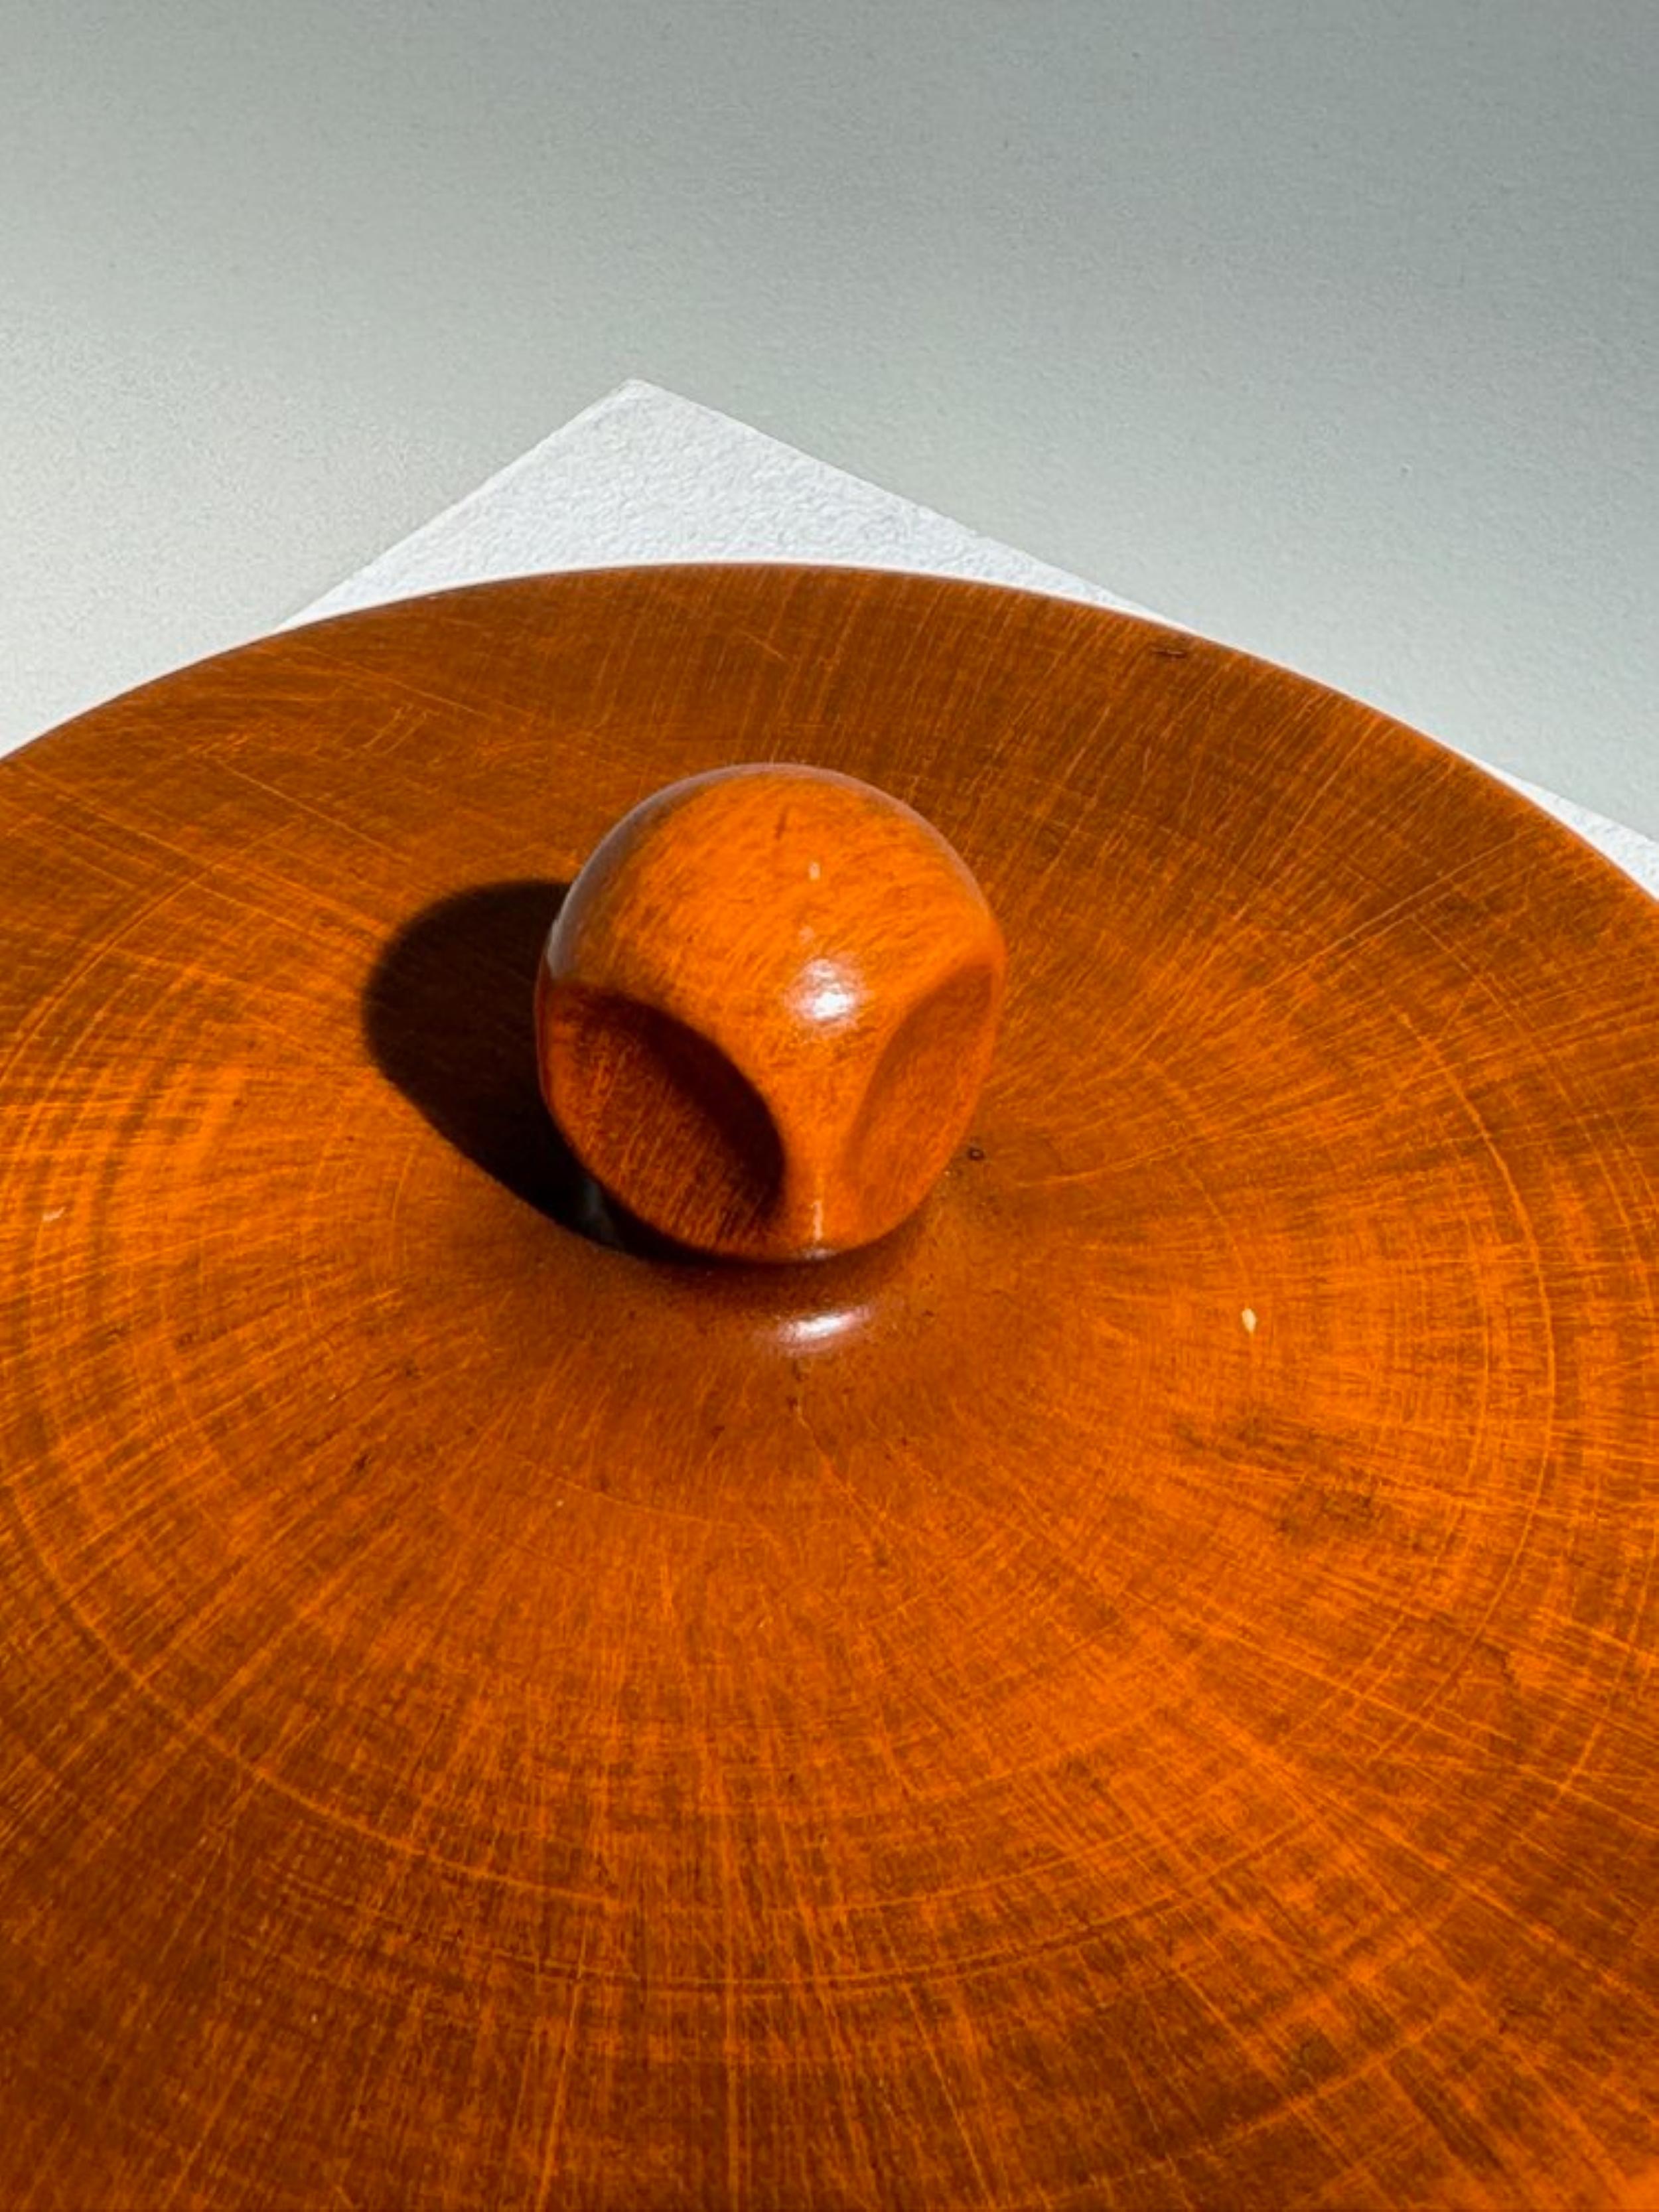 This vintage red pottery bowl by royal haeger, known for its circular ceramic design with warm brown and orange hues, exudes modern elegance. royal haeger, a renowned american pottery company established in 1871, crafted pieces like this with